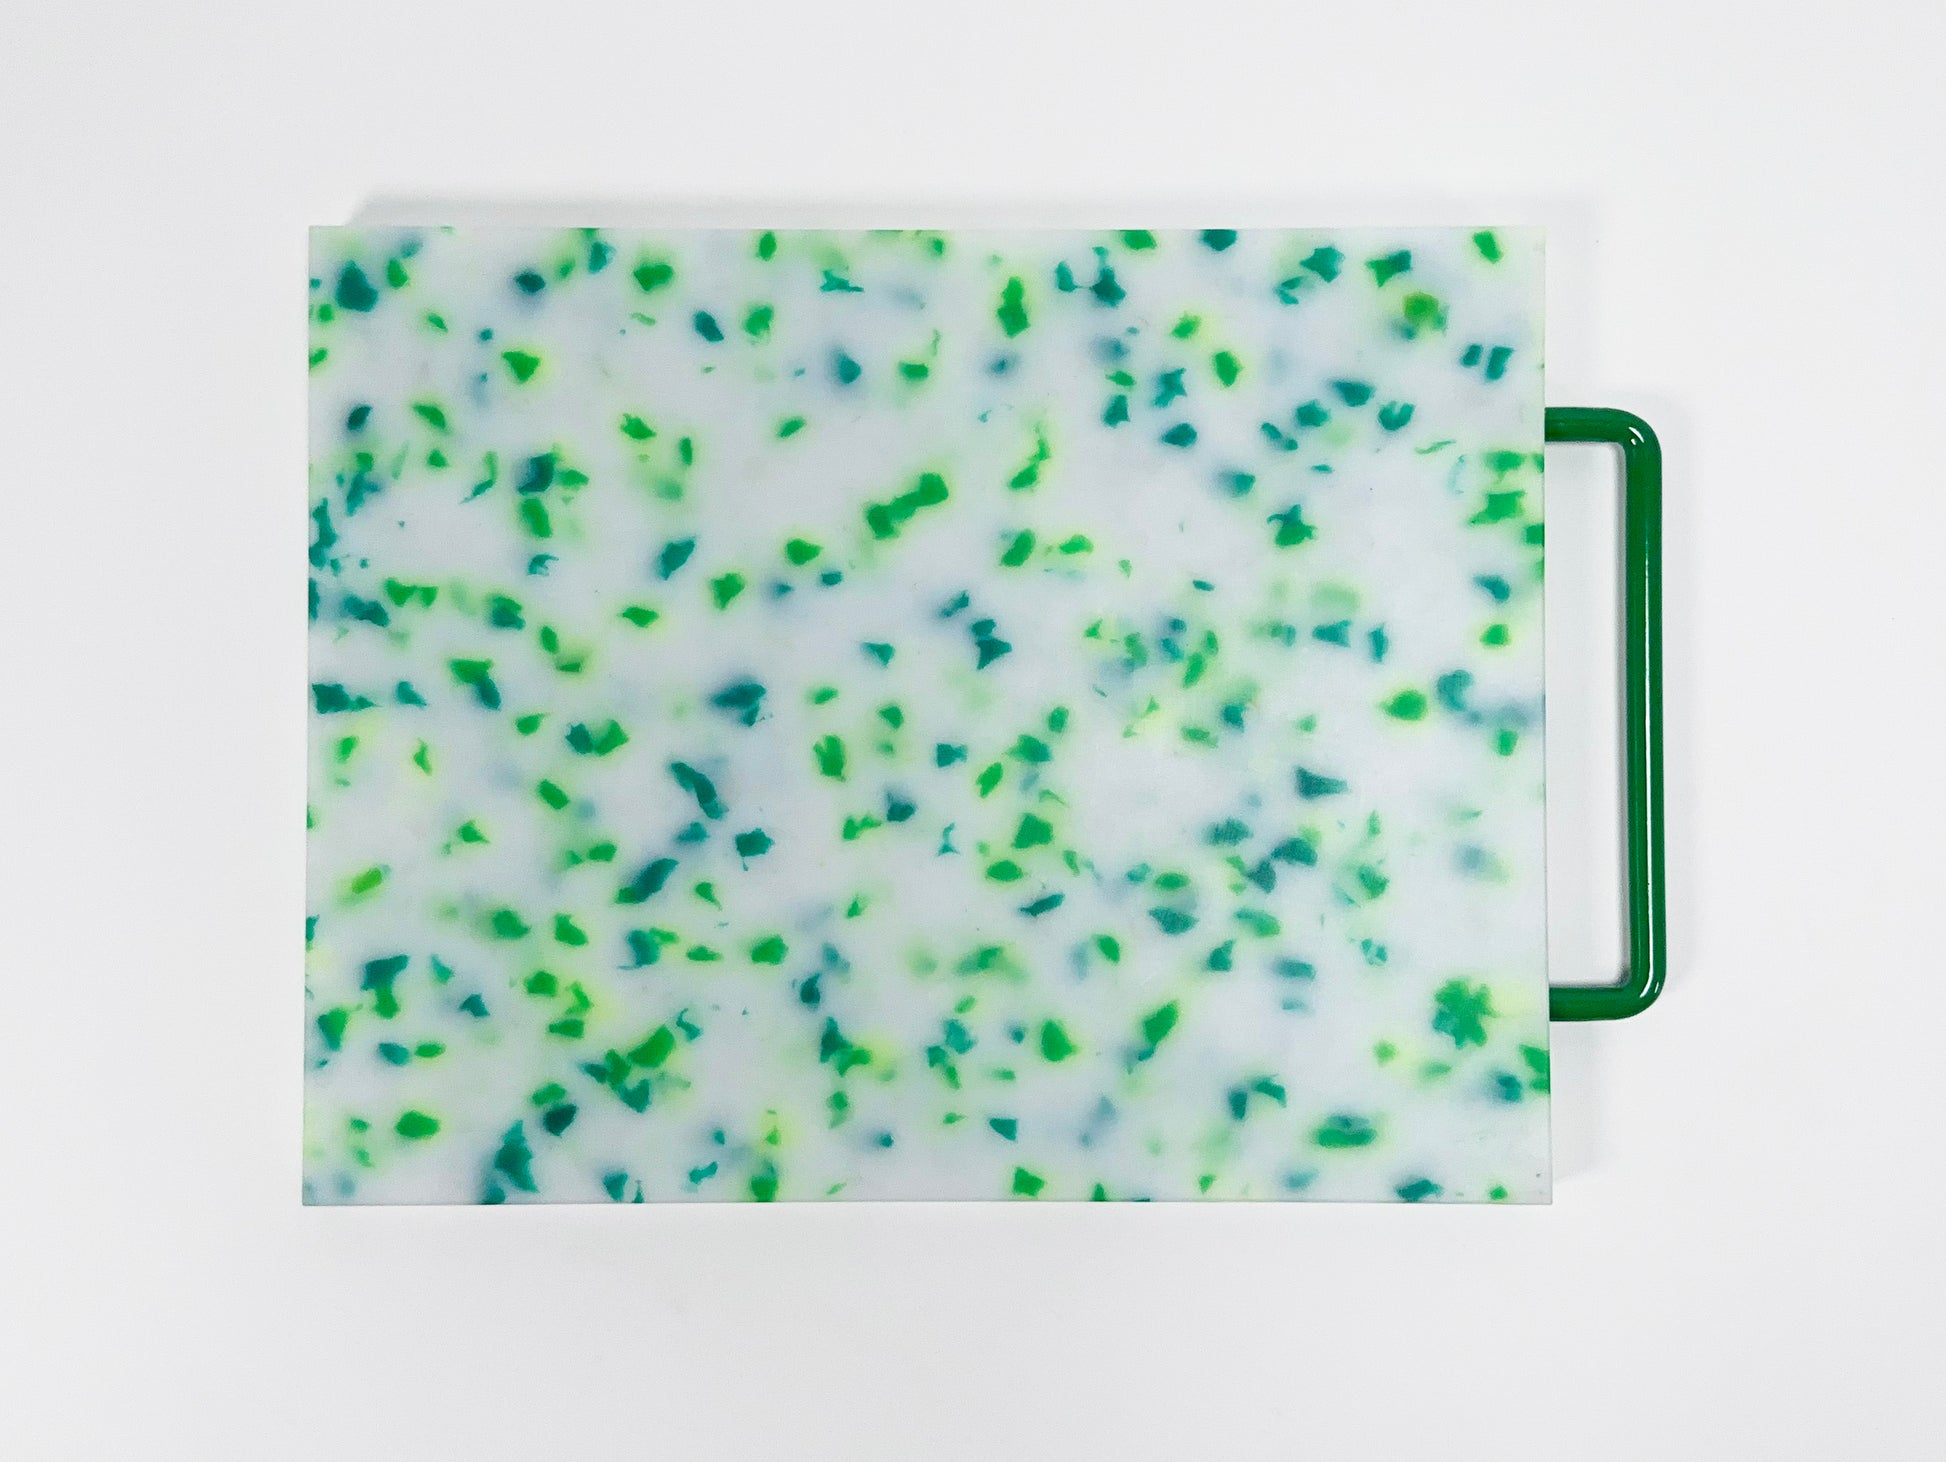 mostly white cutting board with blue and green confetti throughout, handle is green 